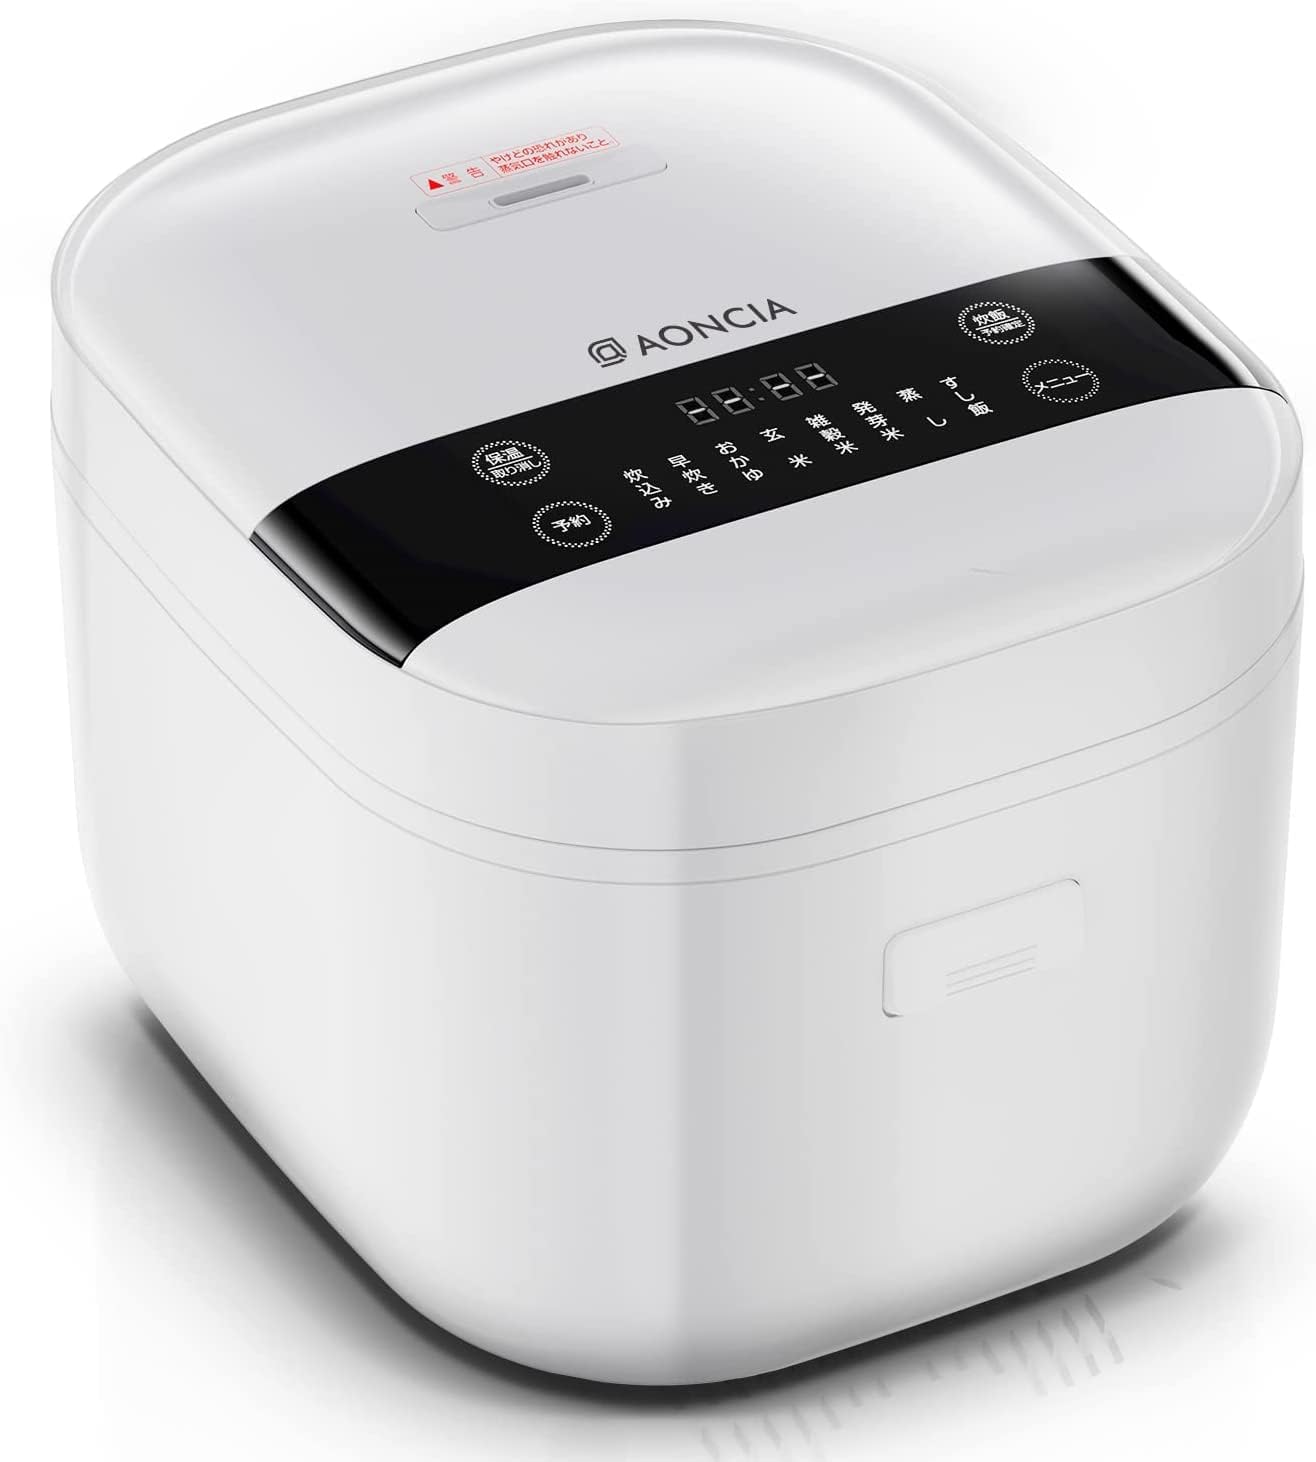 S-RC018F Rice Cooker (3 cups) 